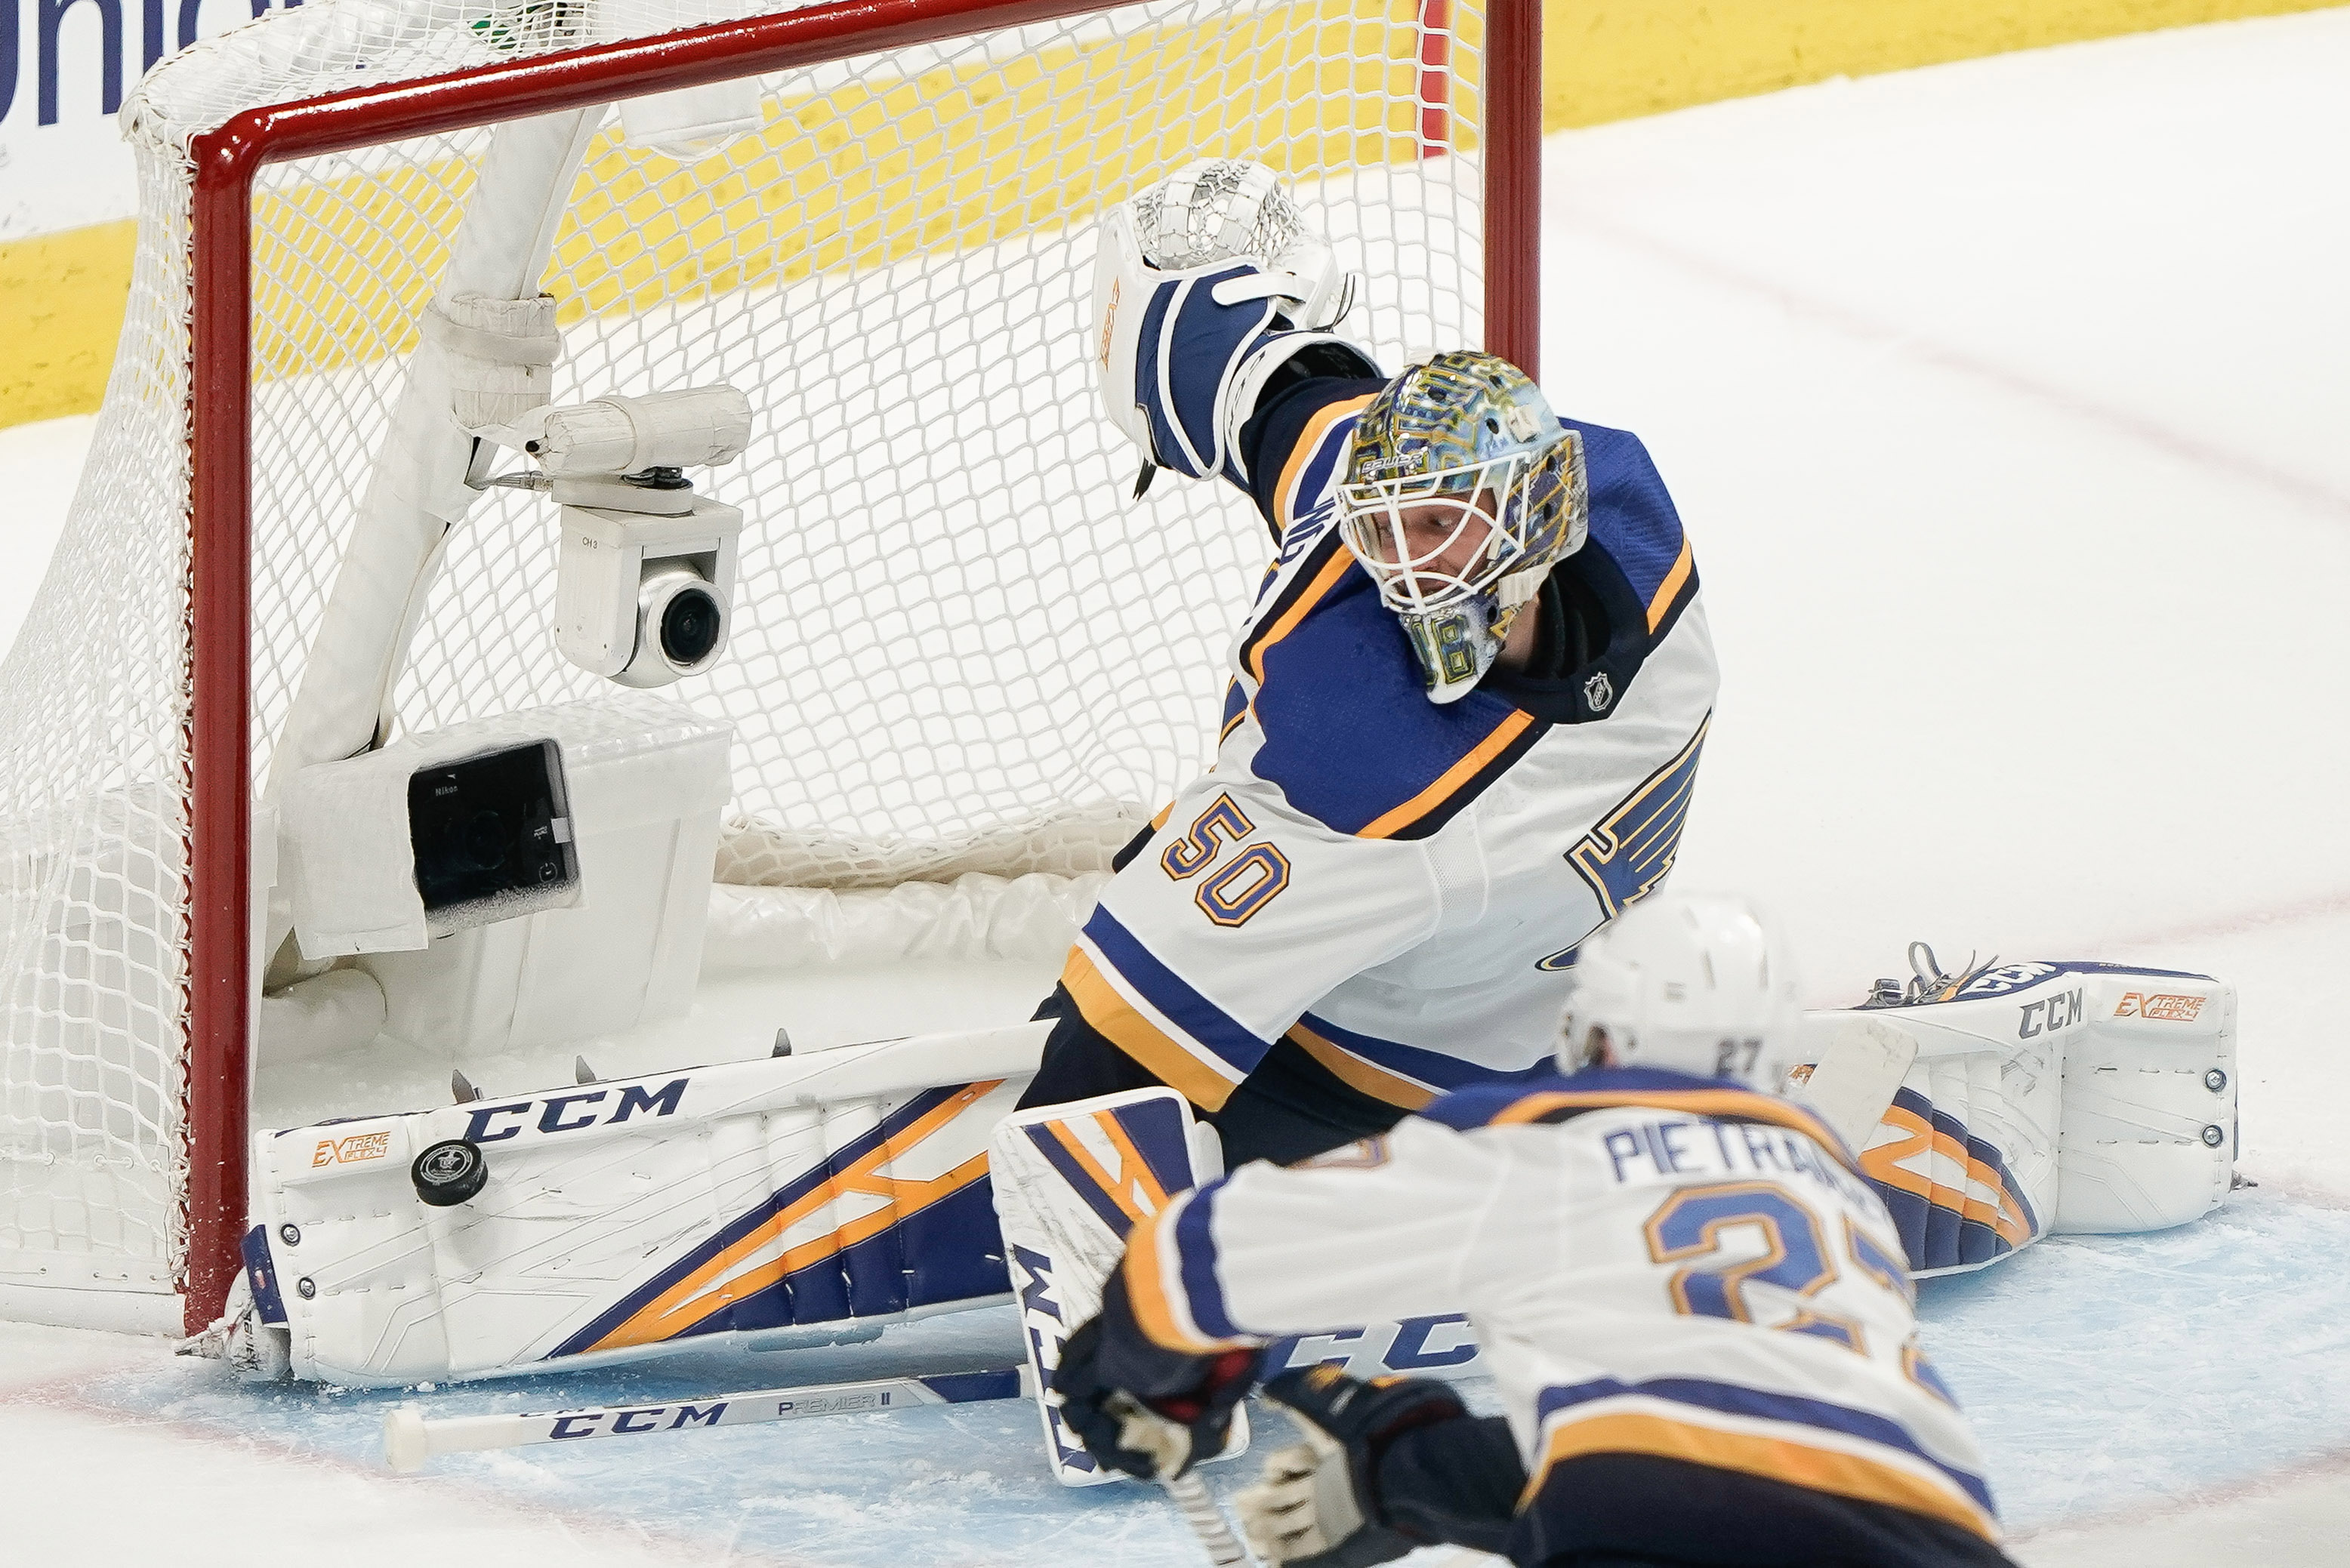 2019-05-12T013608Z_827091077_NOCID_RTRMADP_3_NHL-STANLEY-CUP-PLAYOFFS-ST-LOUIS-BLUES-AT-SAN-JOSE-SHARKS